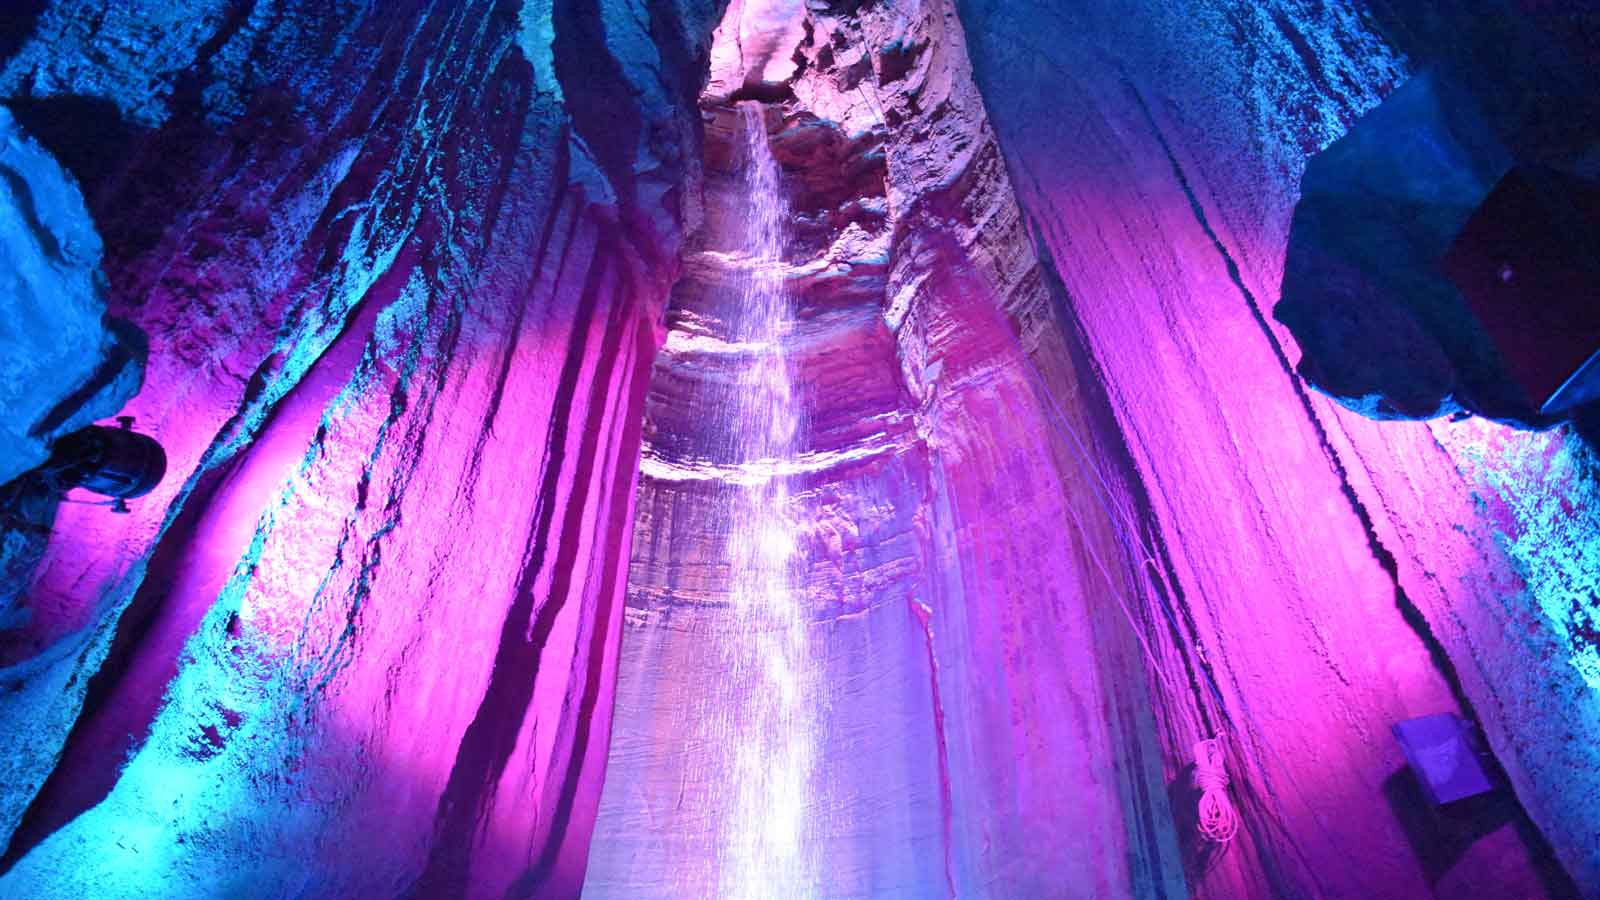 <p><span>Located just outside Chattanooga, Ruby Falls is the tallest and deepest underground waterfall open to the public in the USA. Nestled 1,120 feet deep inside Lookout Mountain, visitors access the waterfall by descending 26 stories in an elevator and walking along a cavern path adorned with fascinating geological formations. </span></p><p><span>Dropping 145 feet into a pool, Ruby Falls is naturally breathtaking. Its full-color LED light show enhances it, making it a unique attraction.</span></p>